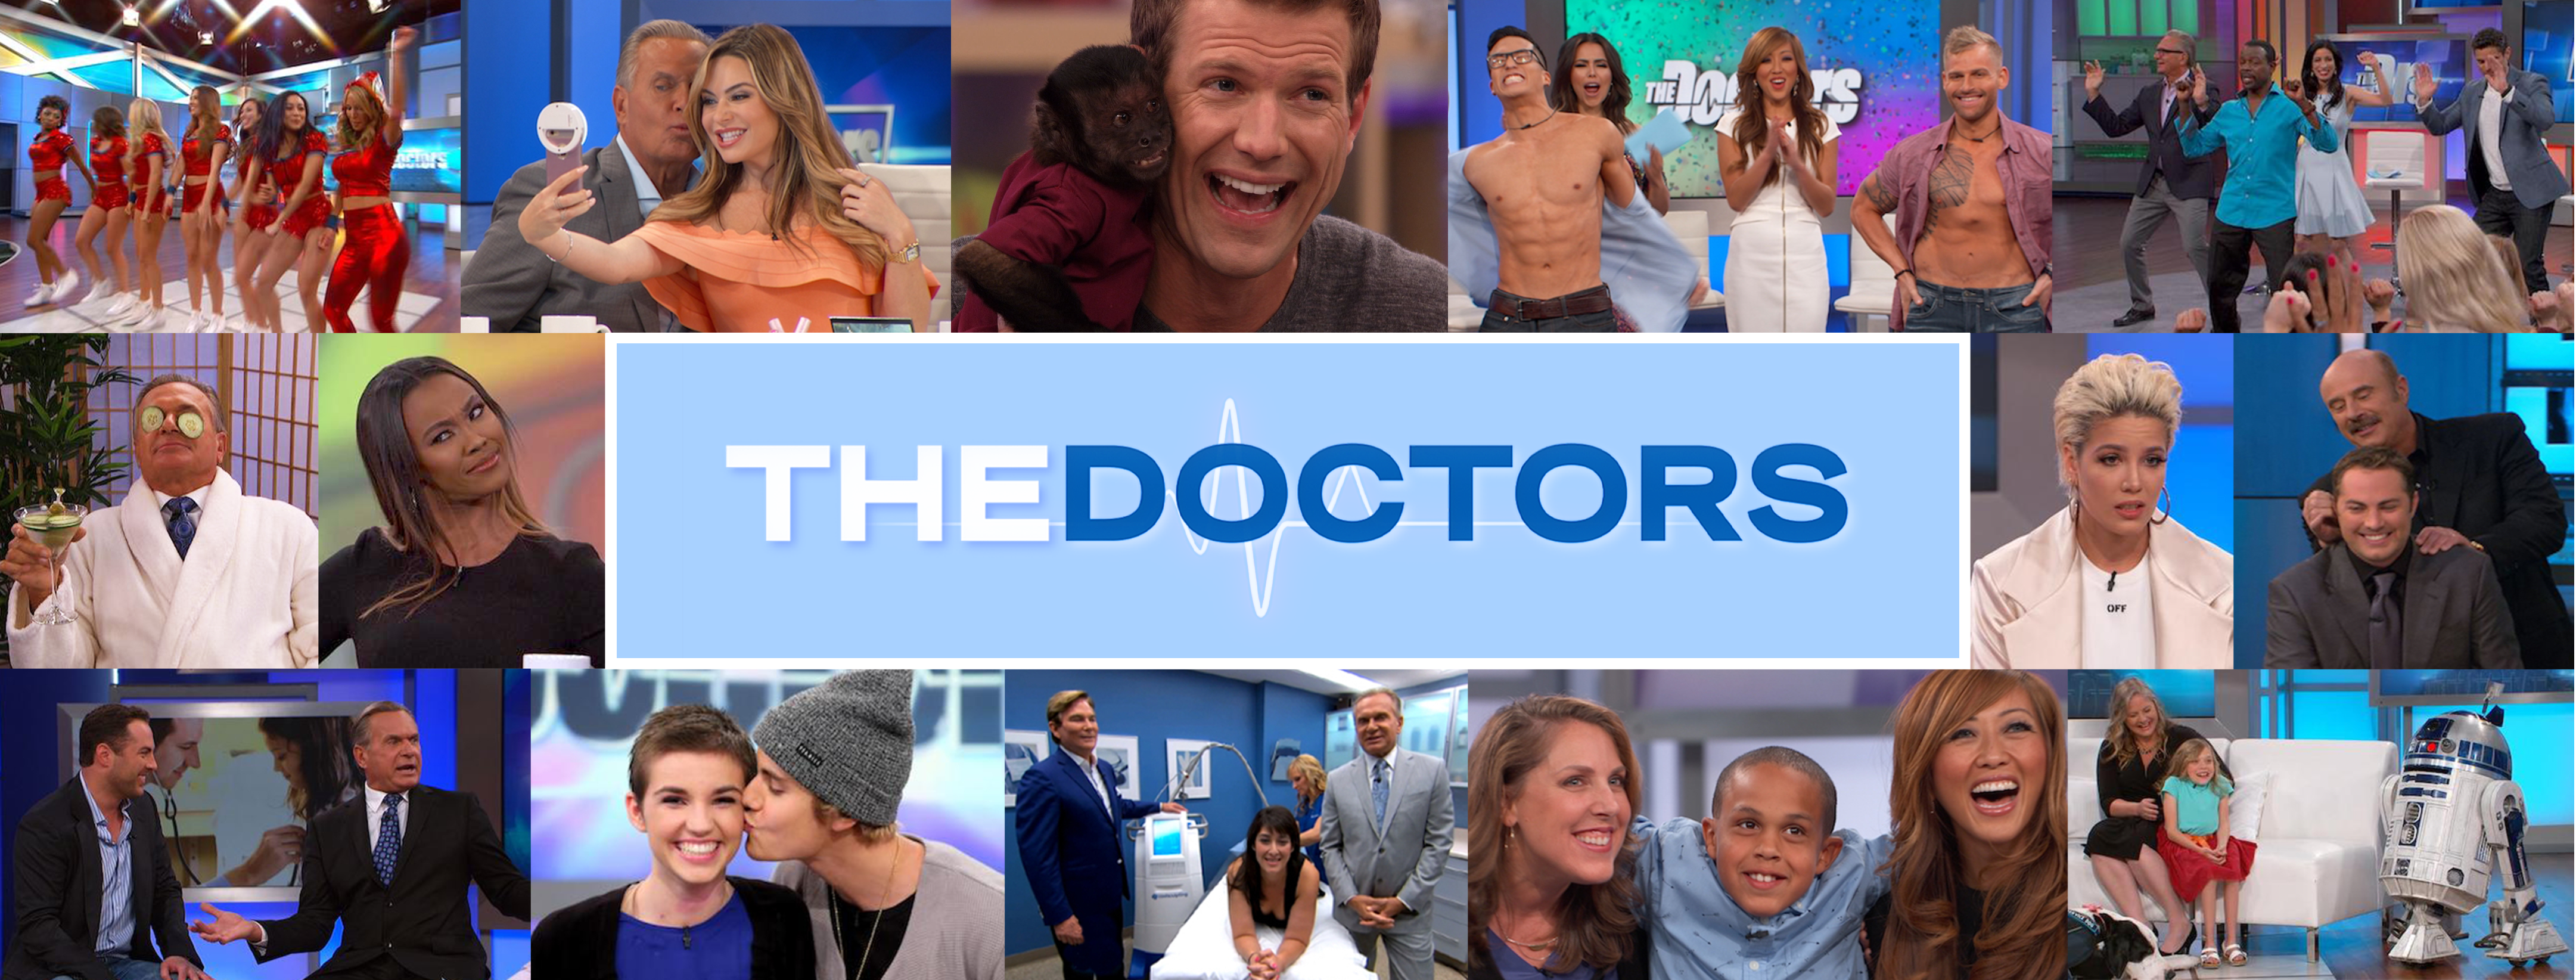 Do You Have an Open Relationship Fantasy? | The Doctors TV ...